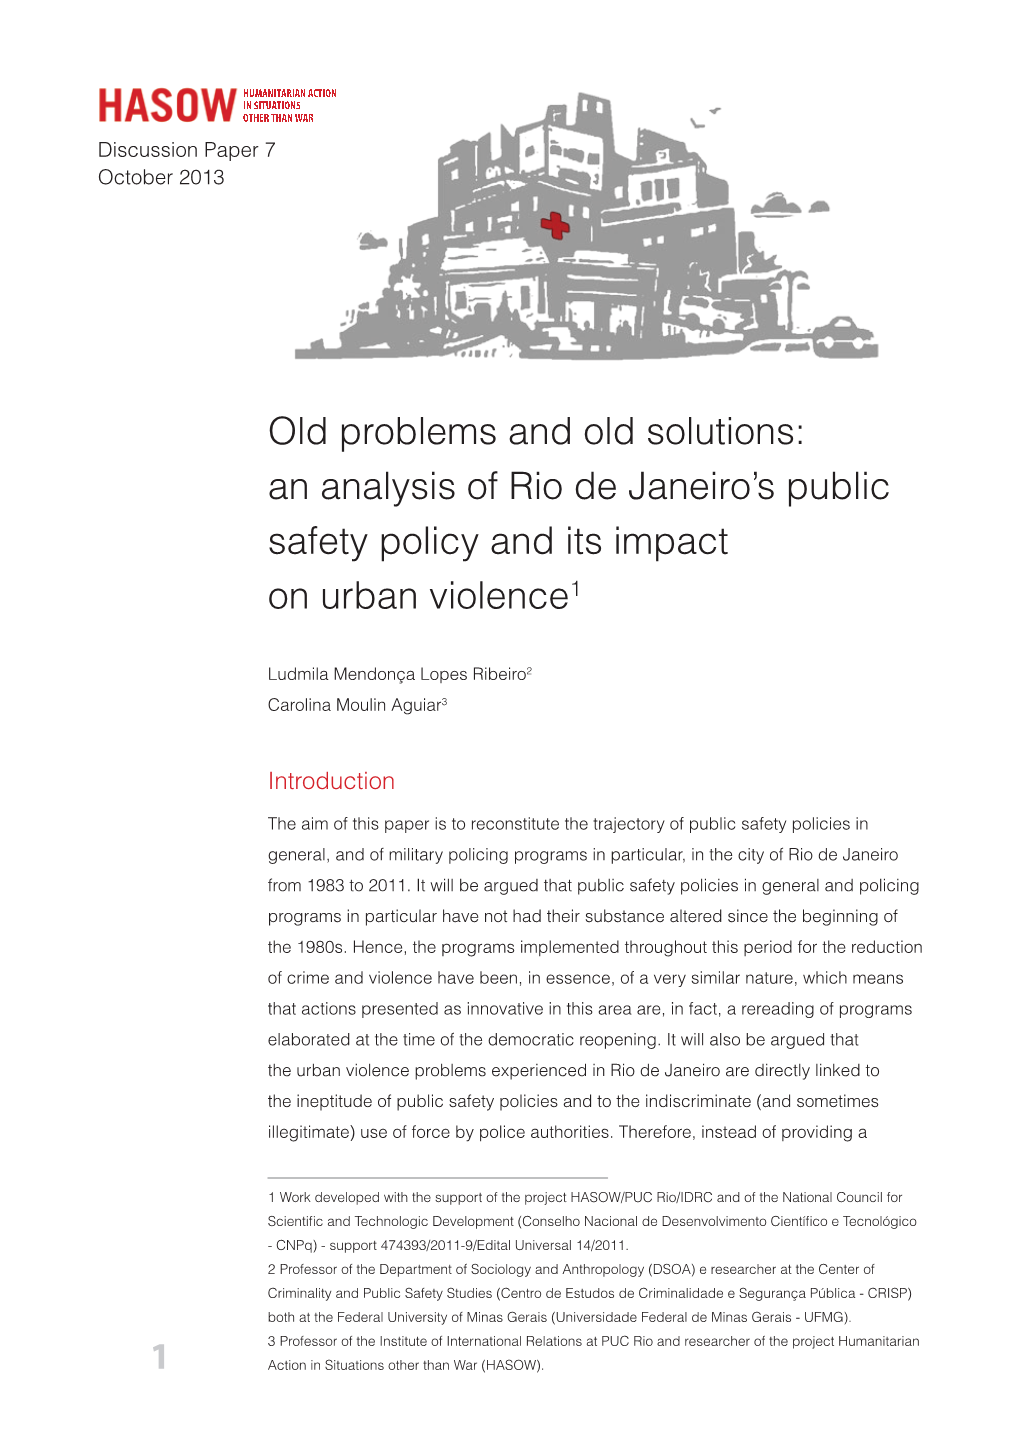 Old Problems and Old Solutions: an Analysis of Rio De Janeiro's Public Safety Policy and Its Impact on Urban Violence1 1